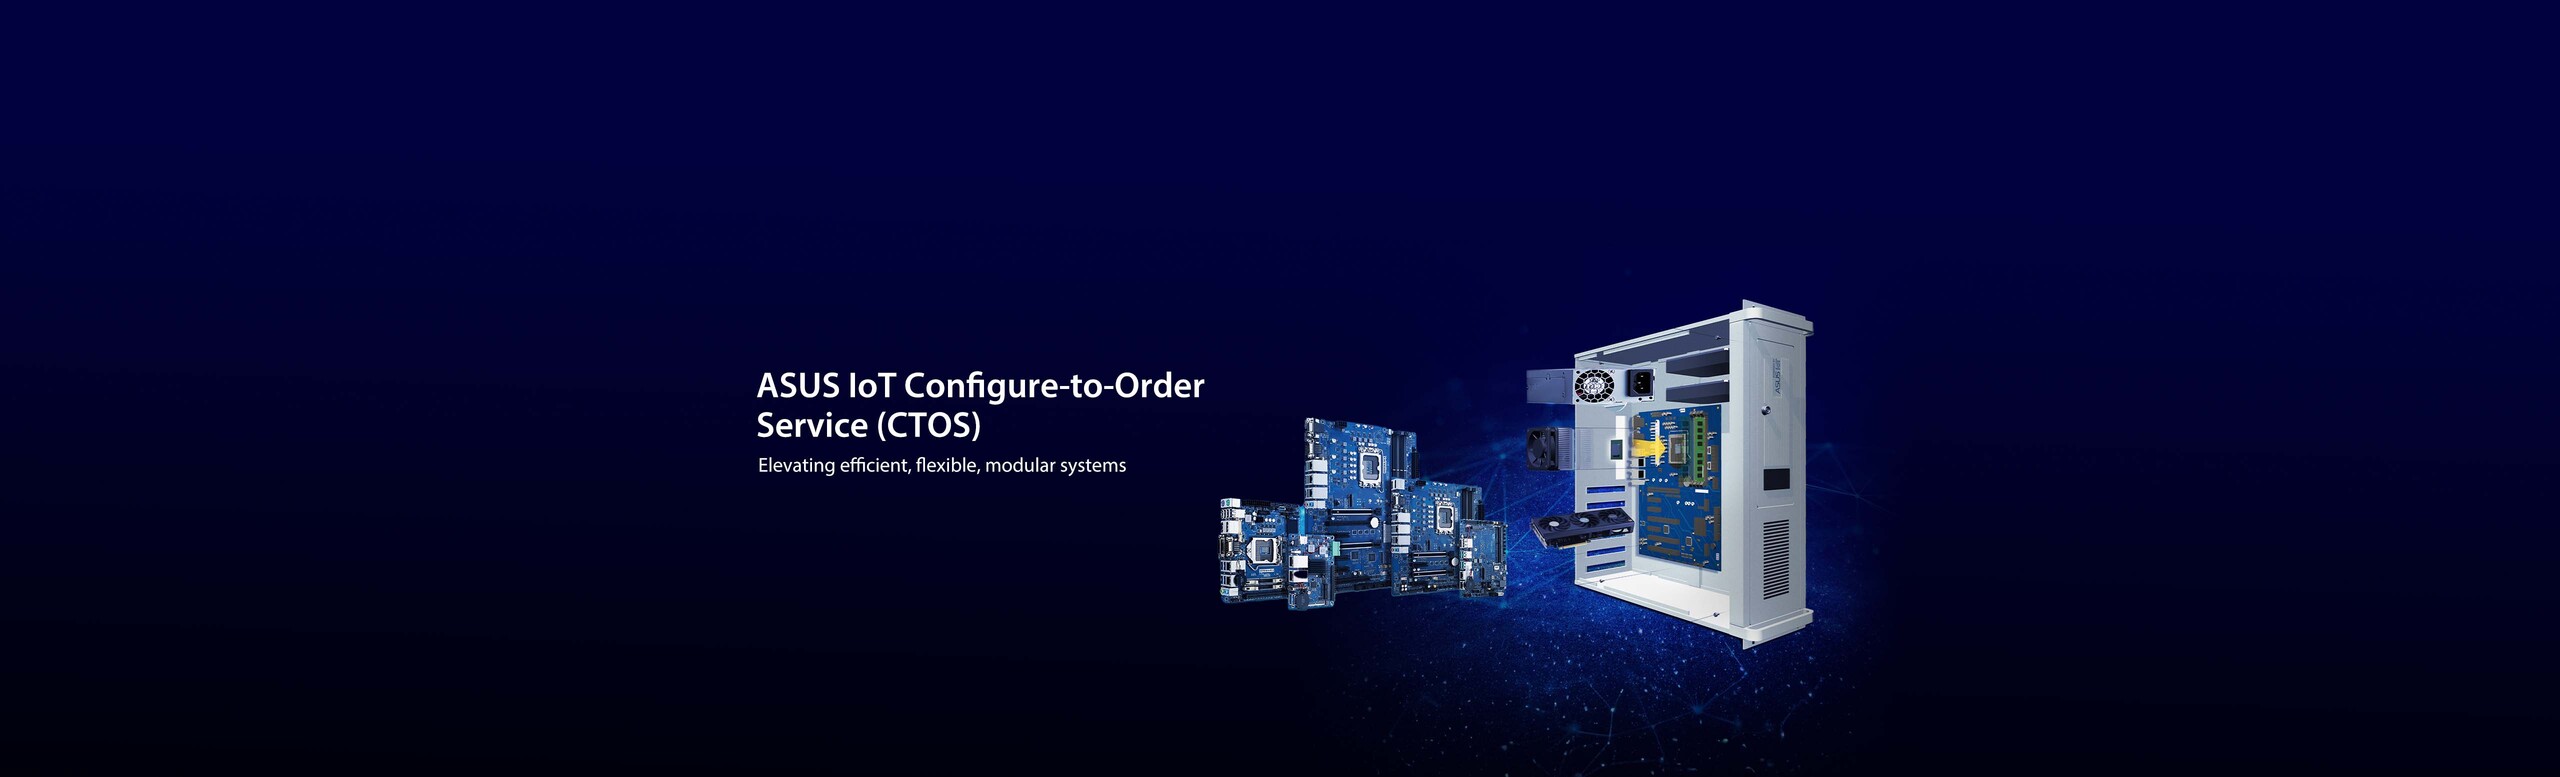 Dark blue background showcasing ASUS IoT Configure-to-Order Service (CTOS) Solution, modular products, and industrial motherboards